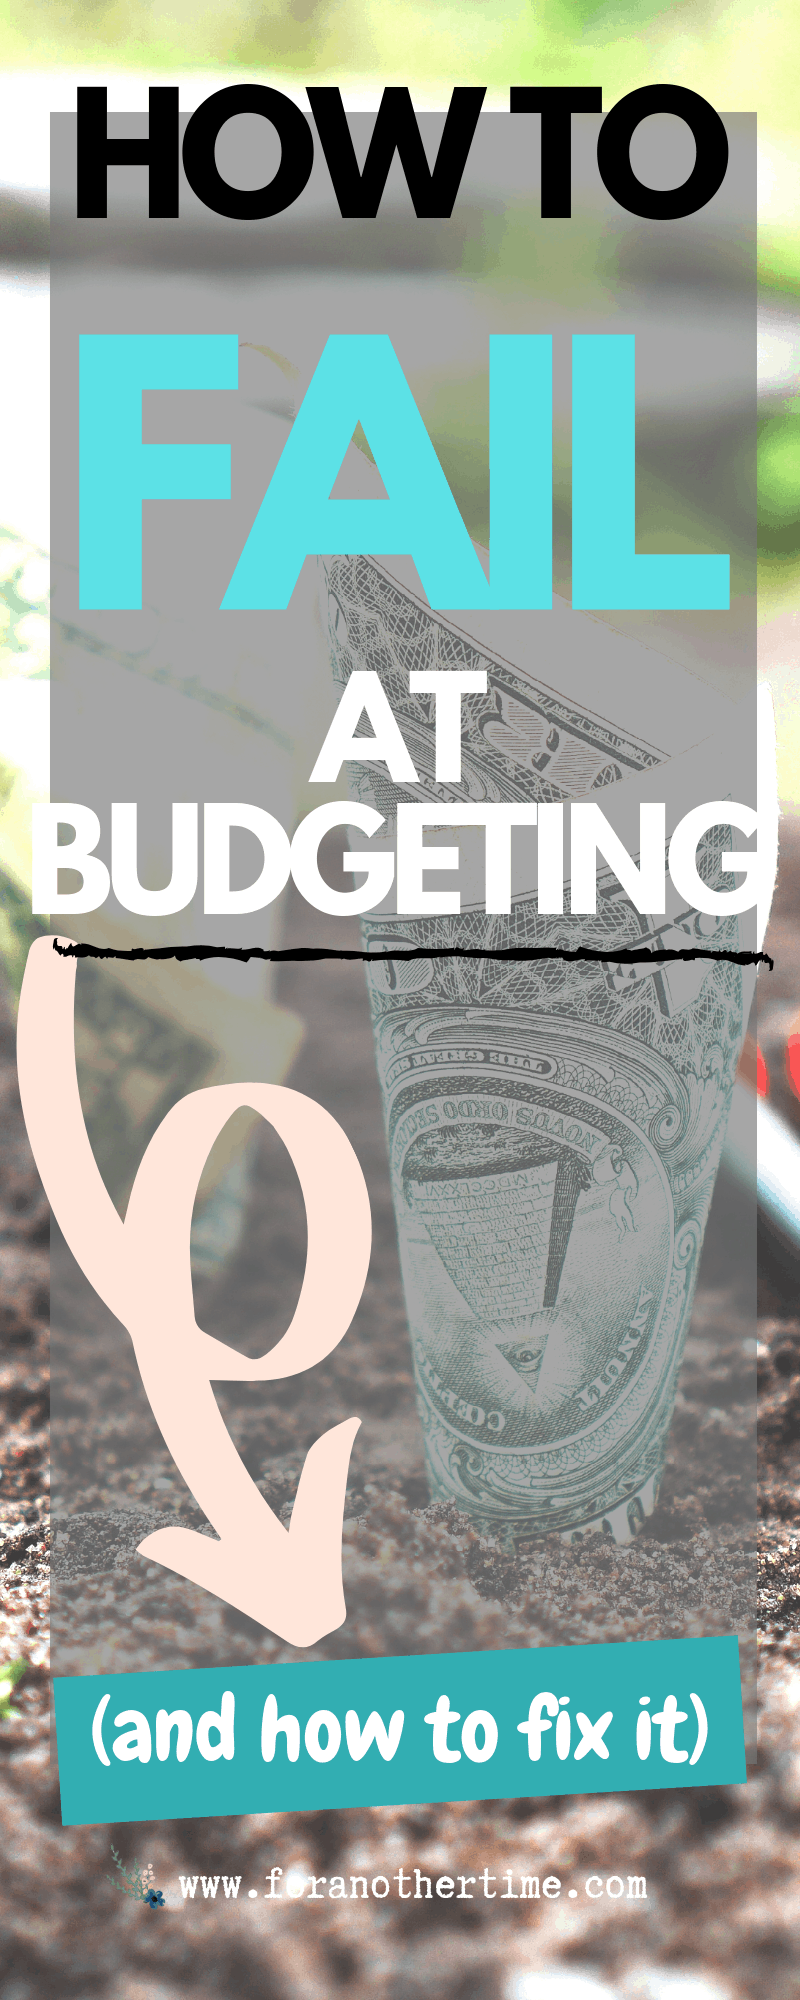 How To Fail At Budgeting (and How To Budget To Win)